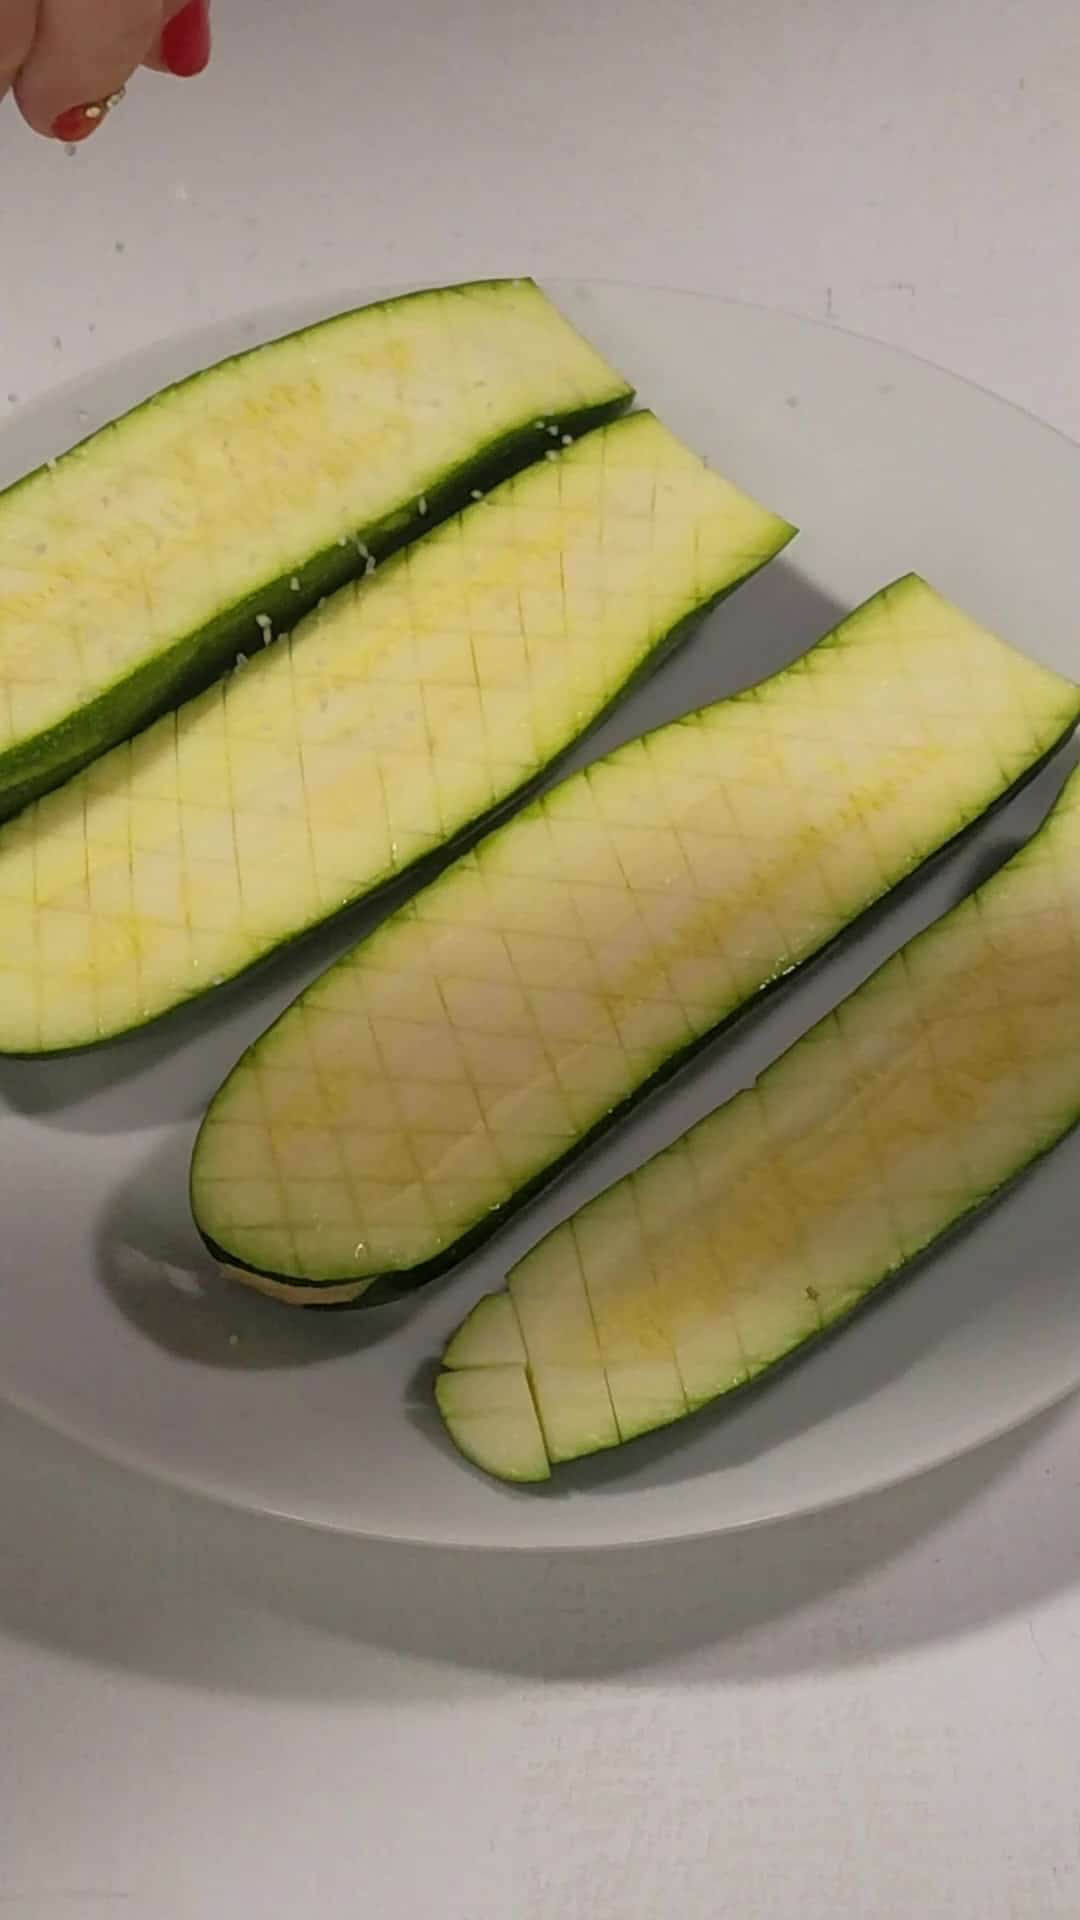 Scored and salted zucchini halves in a plate.